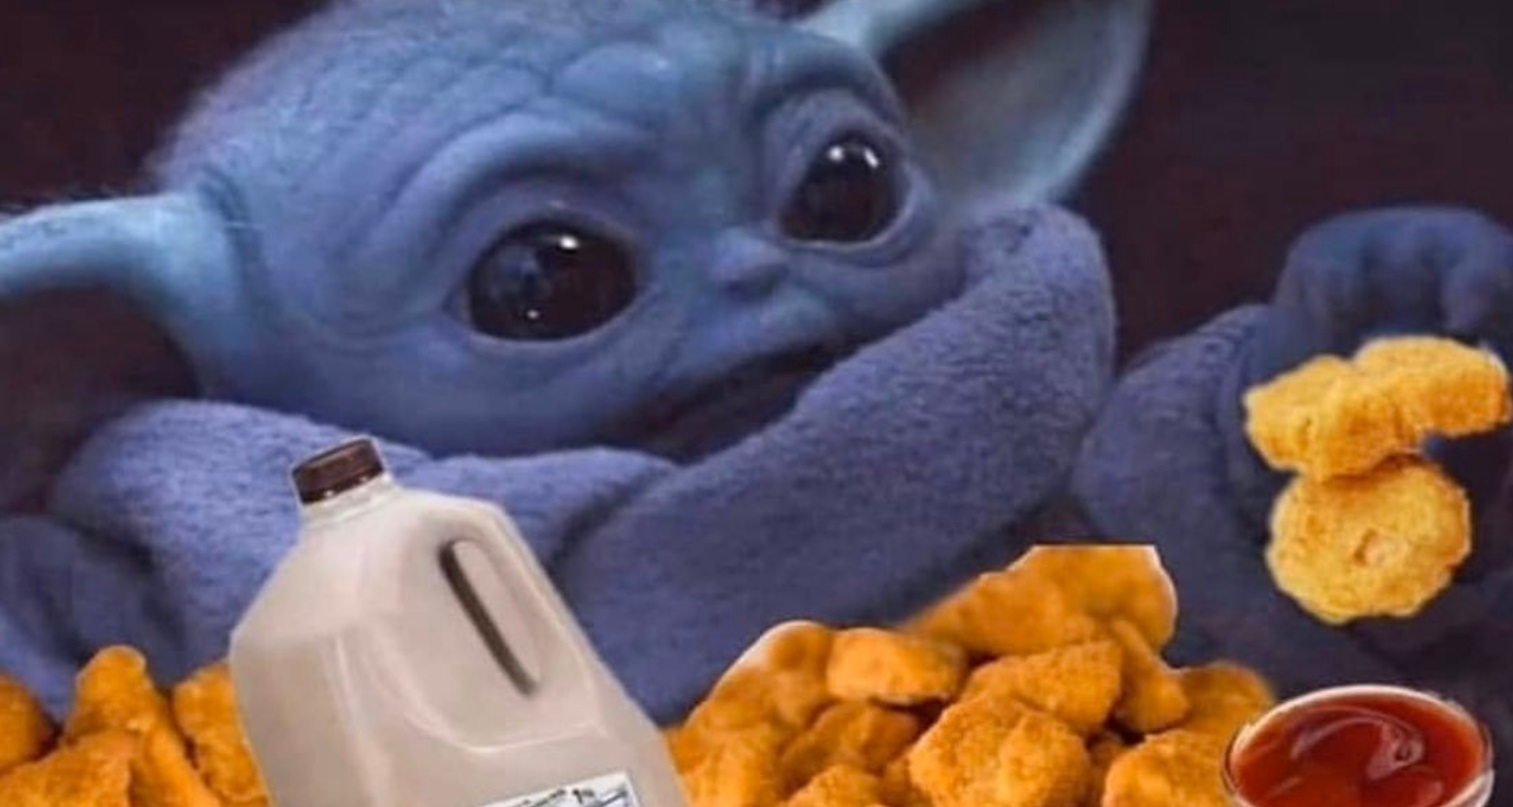 PHOTO Baby Yoda Eating Chicken Nuggets And Chocolate Milk